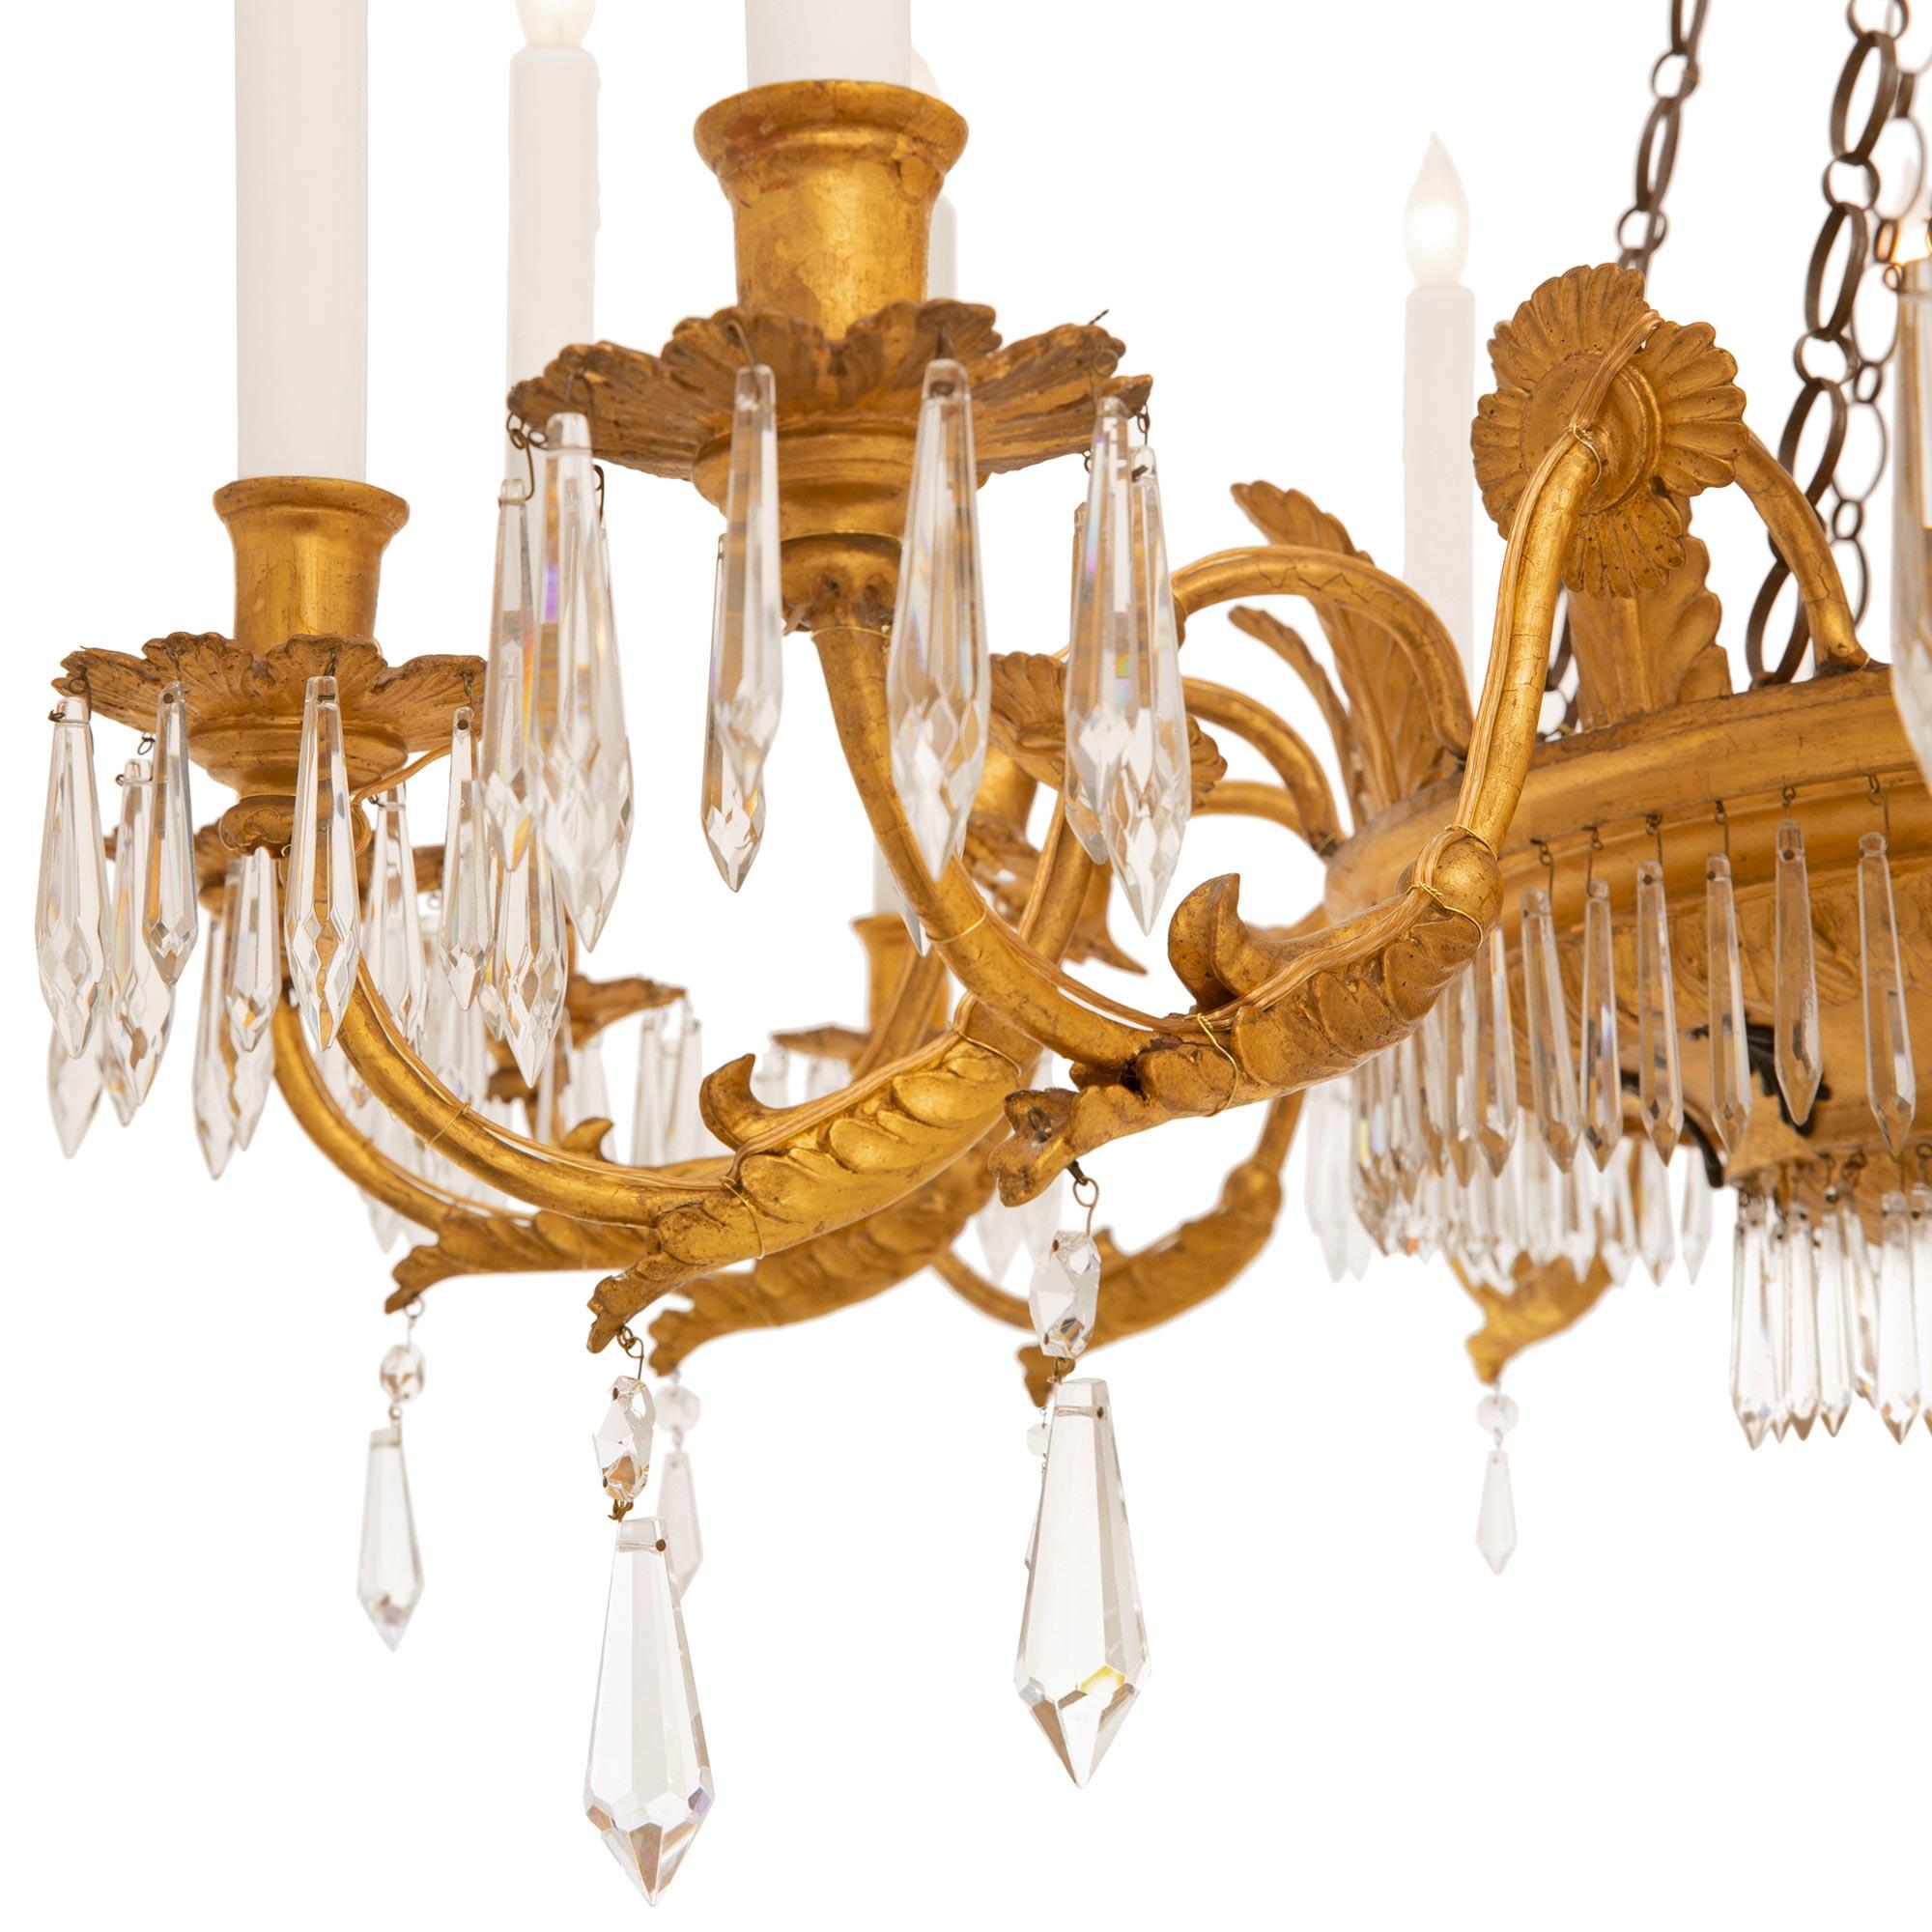 Italian 18th Century Louis XVI Period Giltwood and Crystal Chandelier For Sale 1